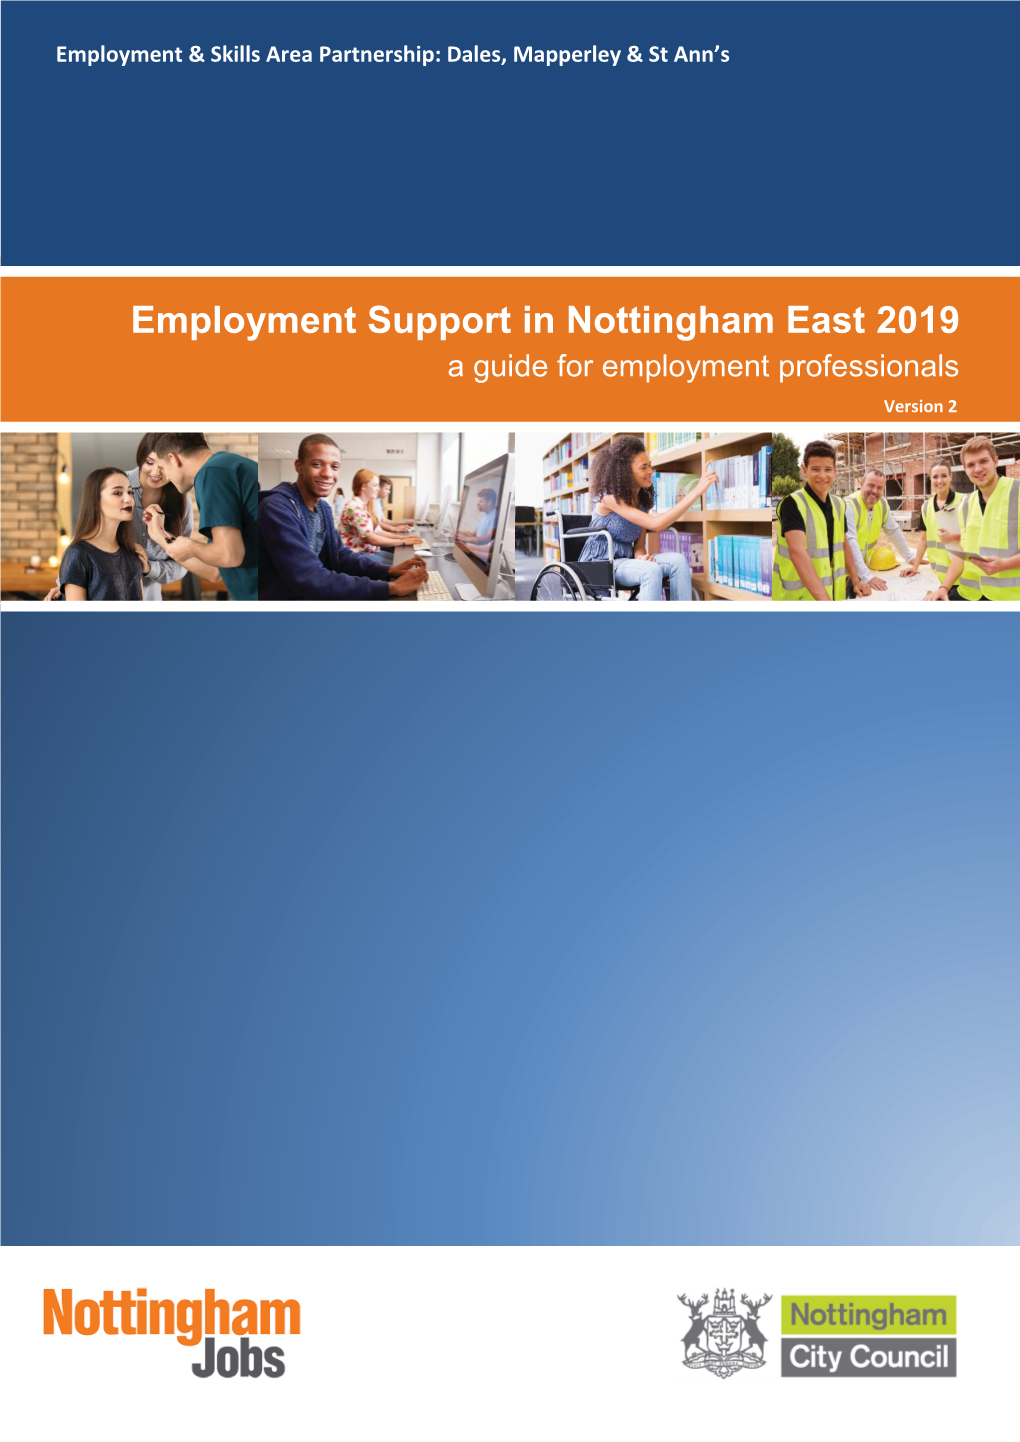 Employment Support in Nottingham East 2019